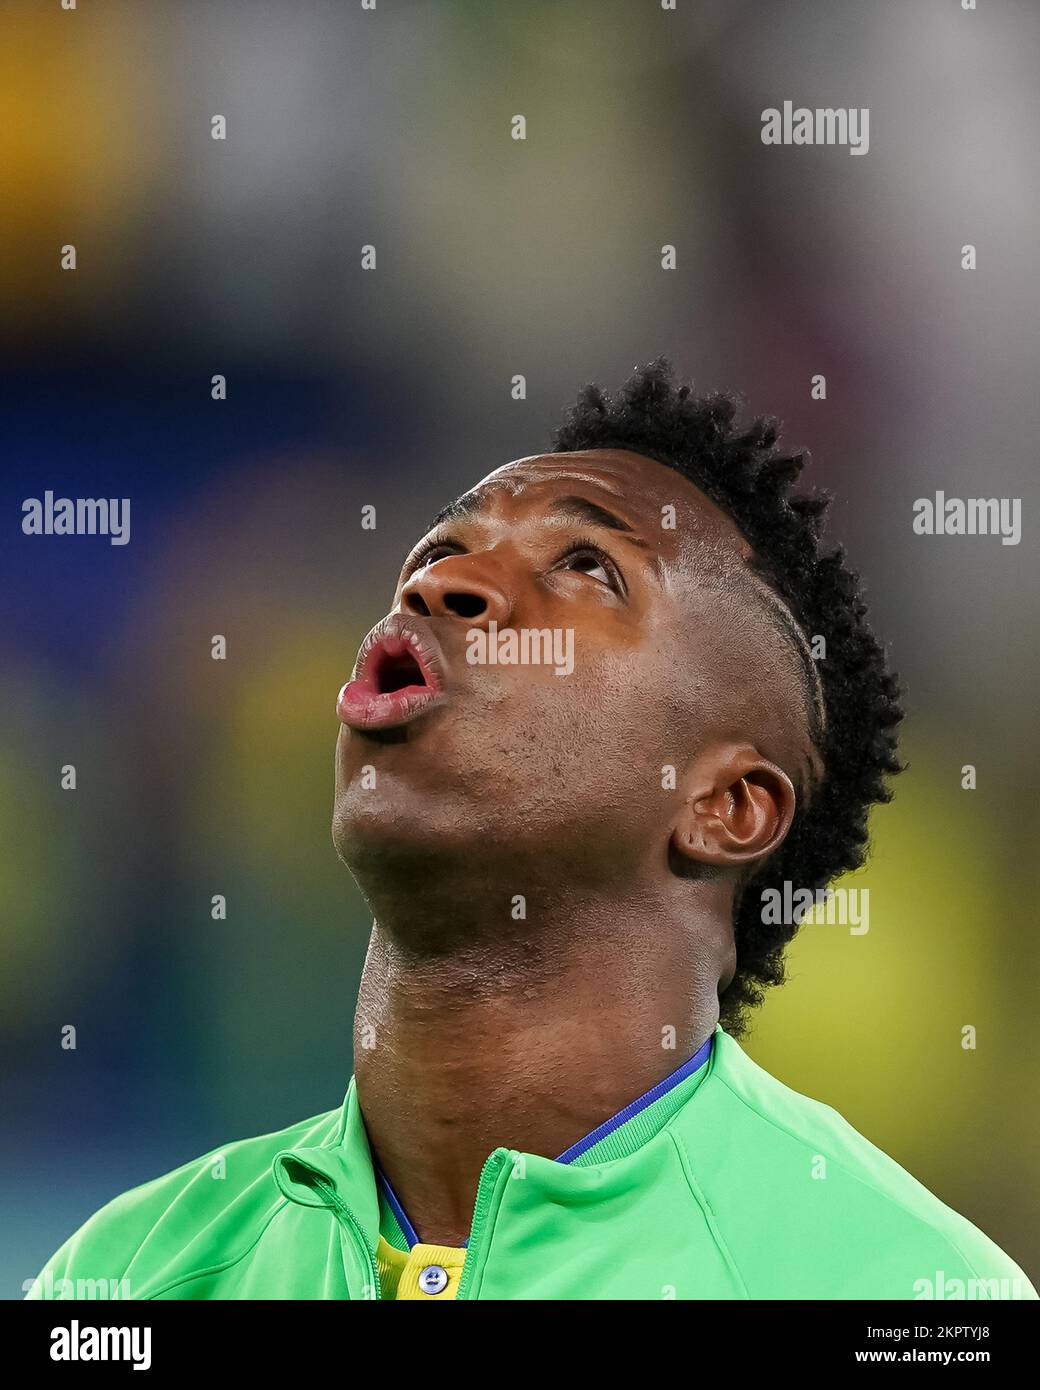 DOHA, QATAR - NOVEMBER 28: Player of Brazil Vinícius Júnior sings the national anthem prior to the FIFA World Cup Qatar 2022 group G match between Brazil and Switzerland at Stadium 974 on November 28, 2022 in Doha, Qatar. (Photo by Florencia Tan Jun/PxImages) Stock Photo